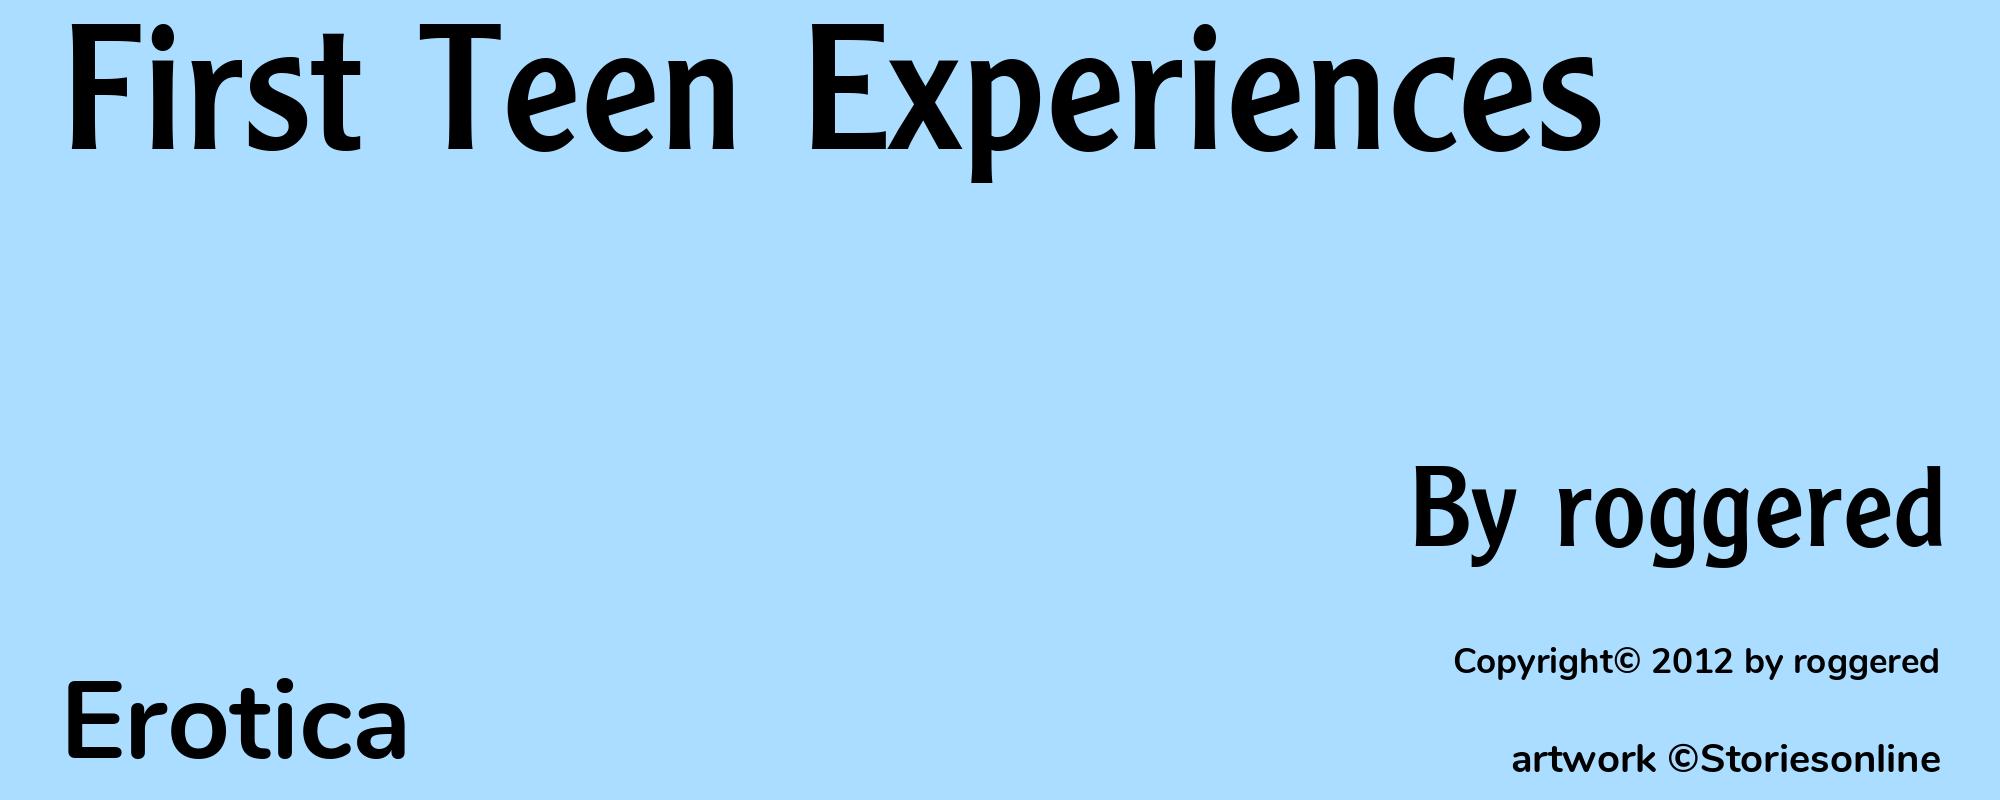 First Teen Experiences - Cover